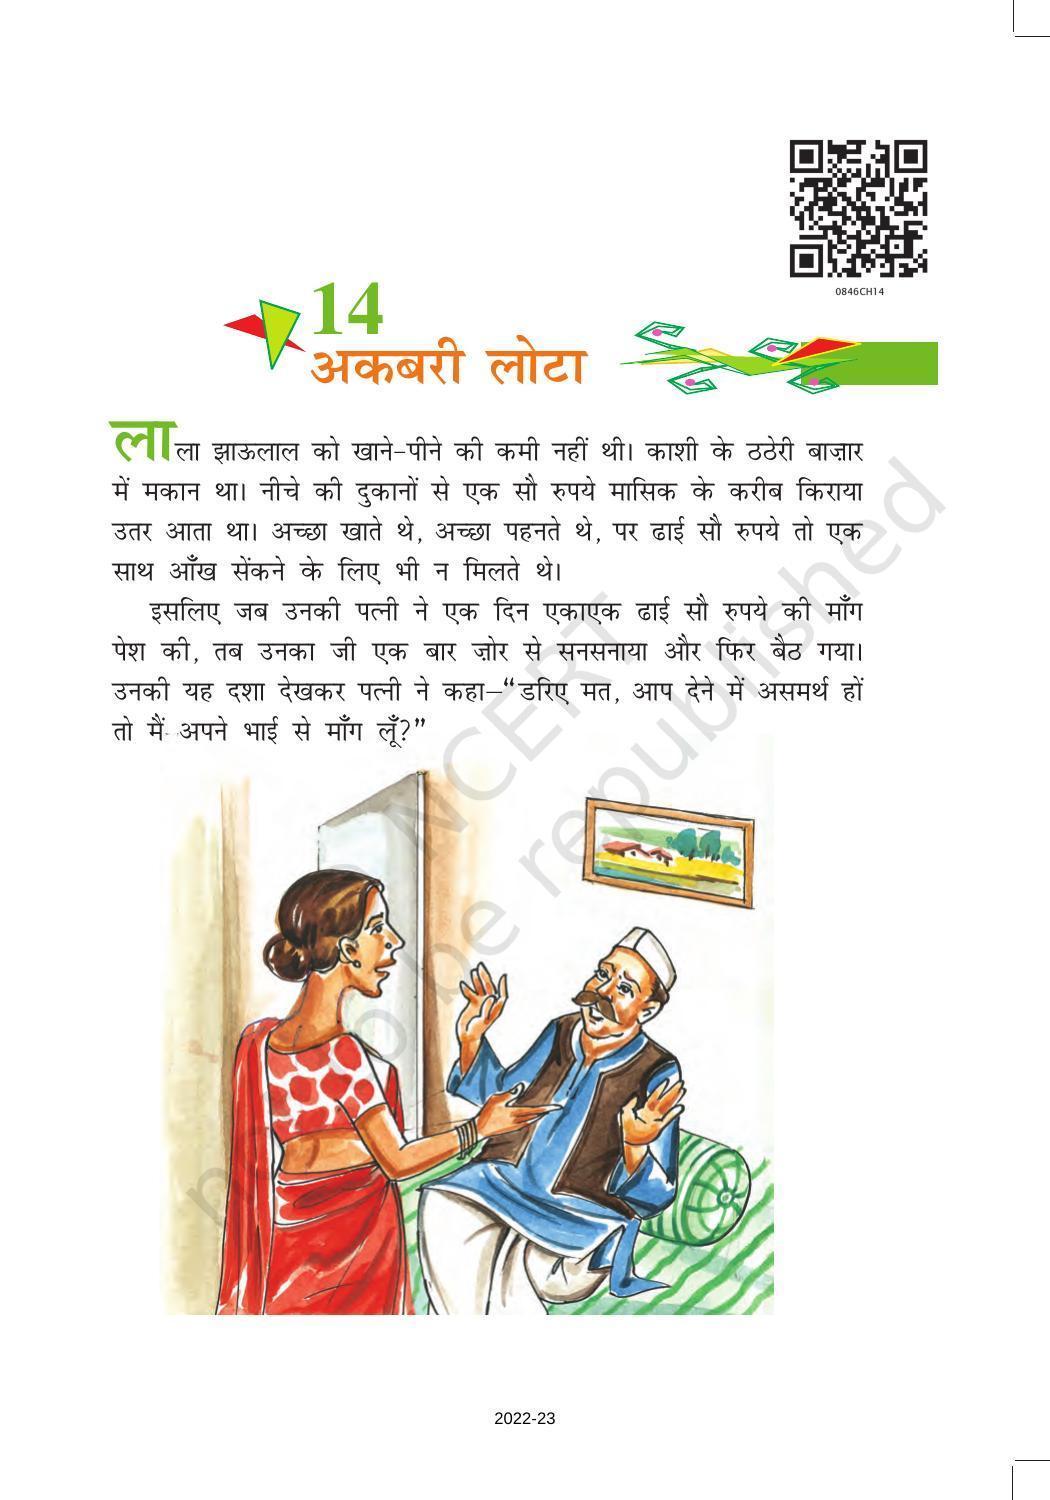 NCERT Book for Class 8 Hindi Vasant Chapter 14 अकबरी लोटा - Page 1